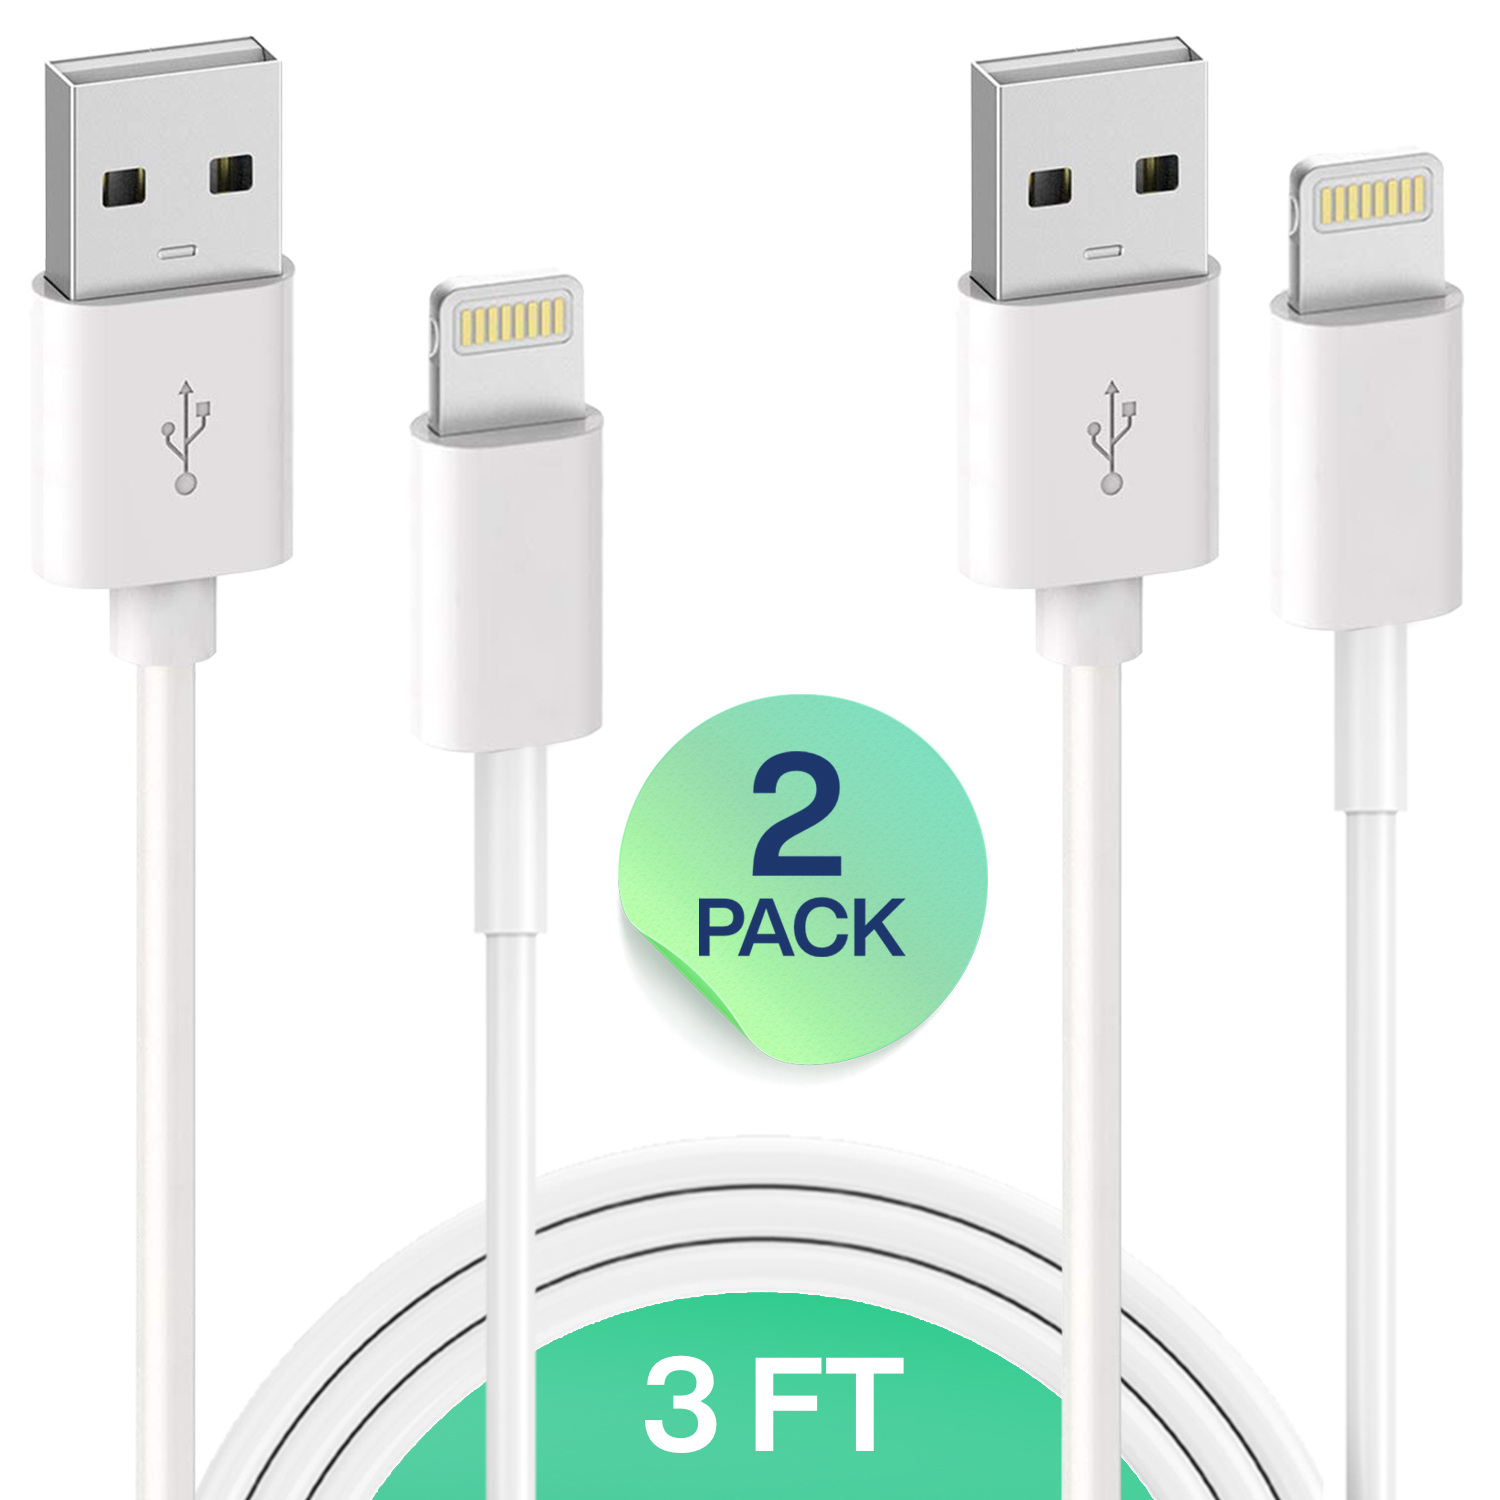 iPhone Charging Cable Set - Infinite Power, 2x 3FT USB Cable, Compatible with iPhone 14,14 Pro Max,13,13 Pro Max/Case, Fast Charging & Syncing Cord - image 1 of 6